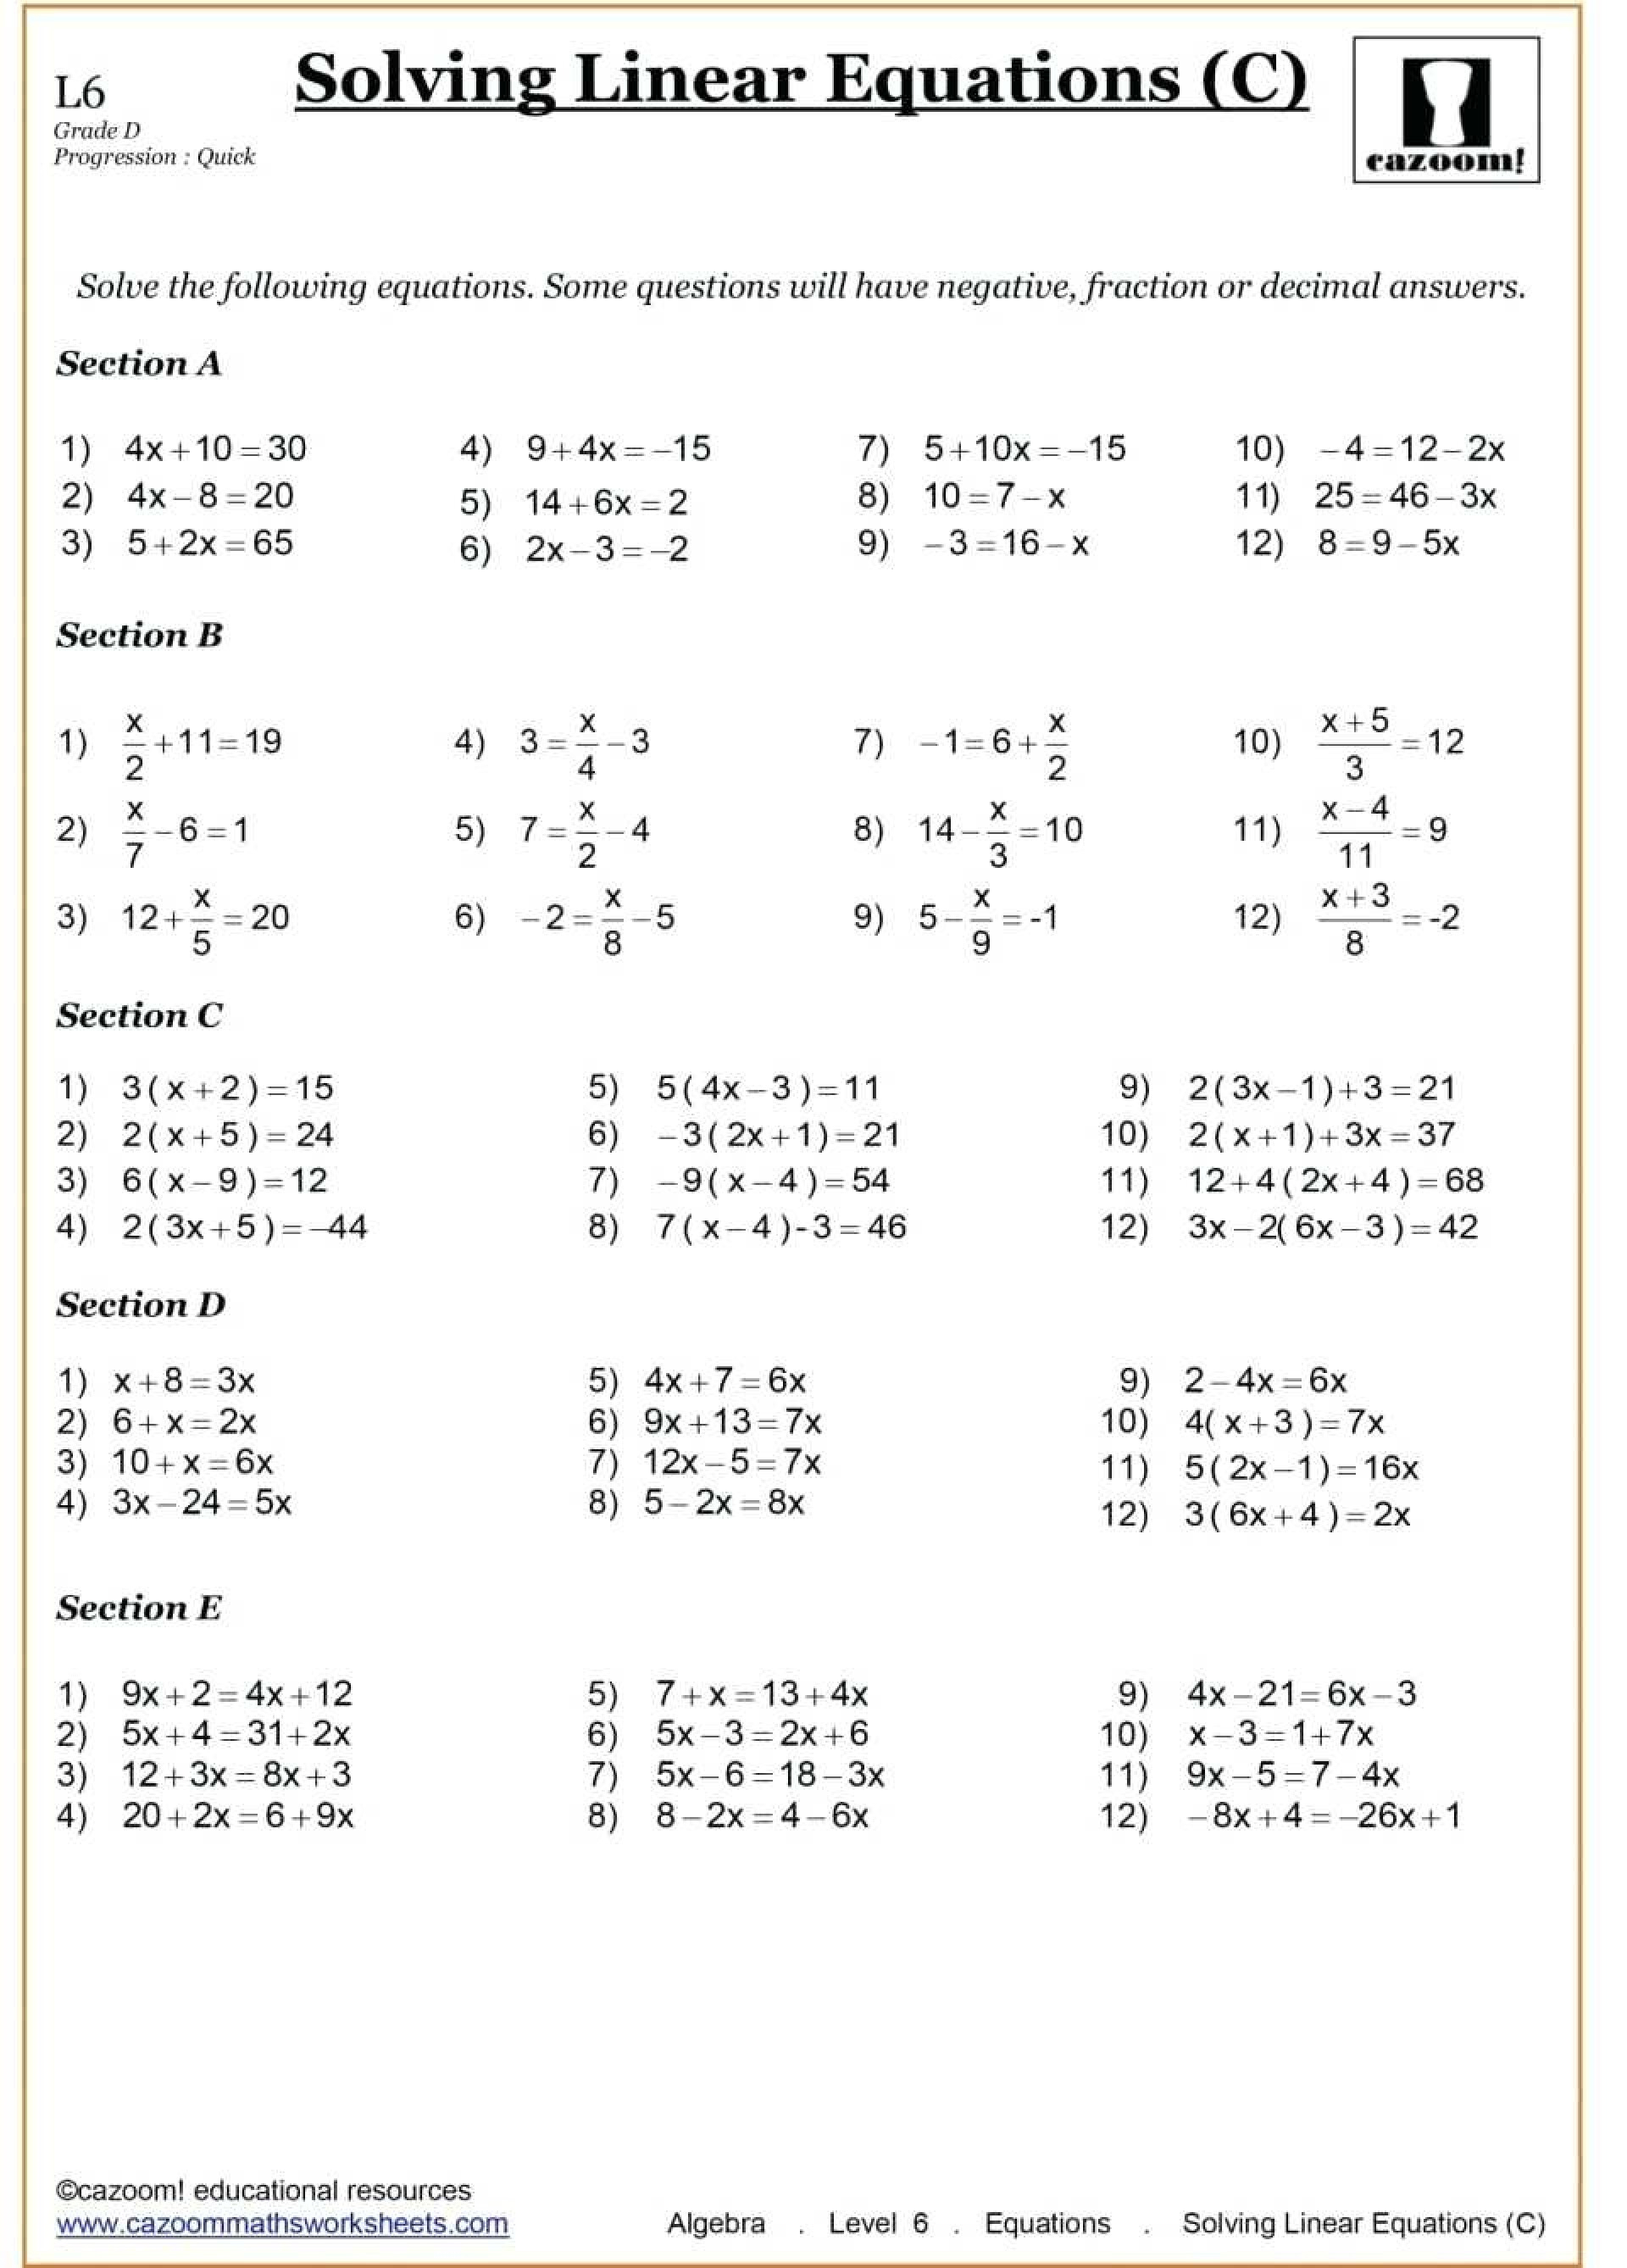 026 Adding And Subtracting Polynomials Coloring Worksheet — db-excel.com